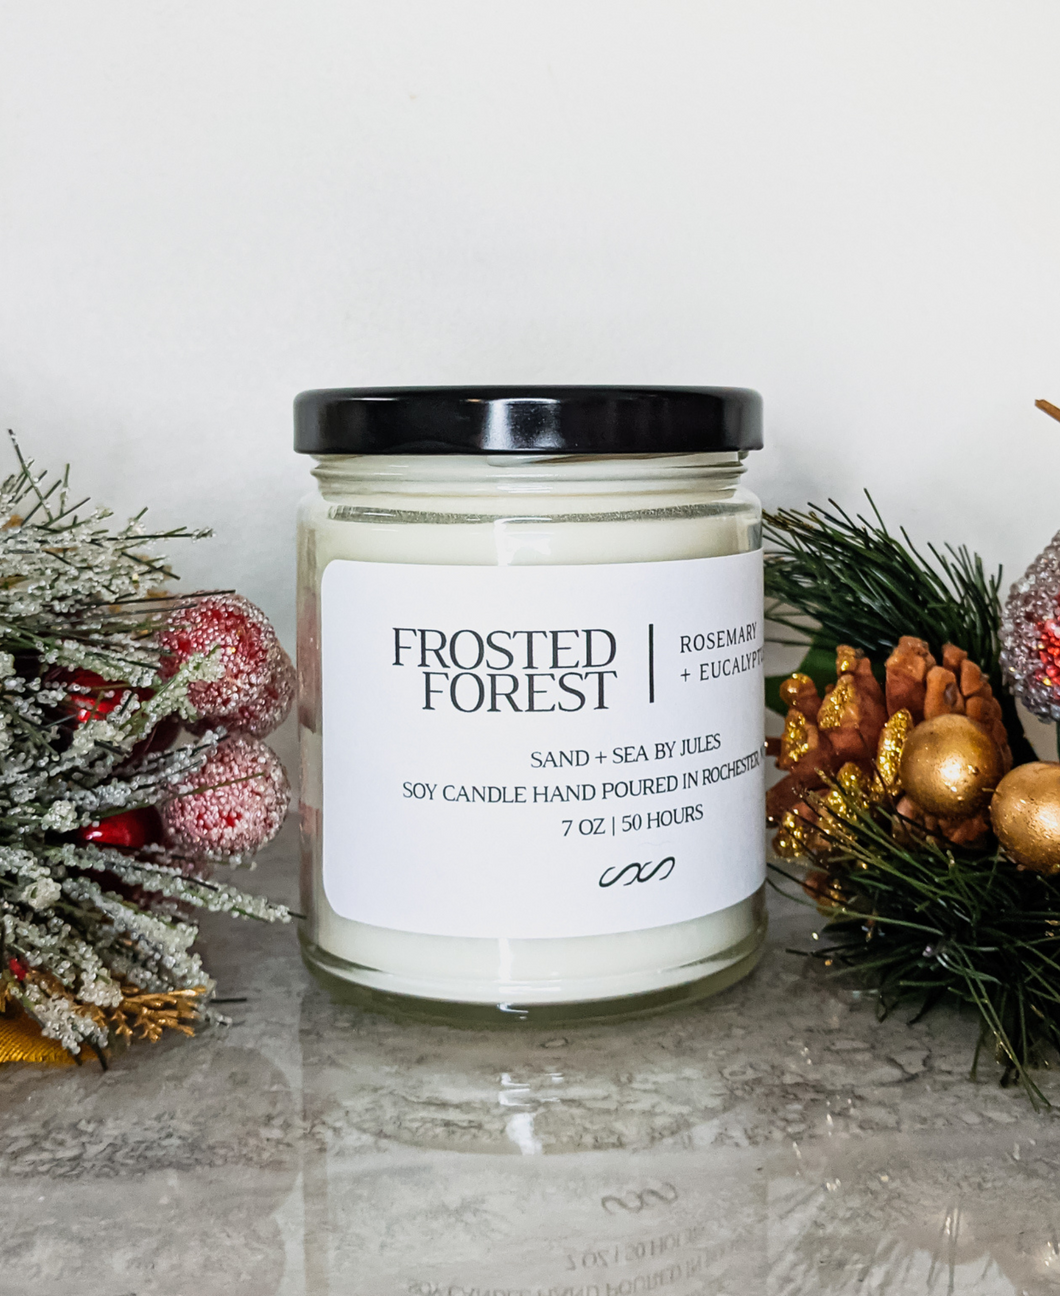 Frosted Forest: Eucalyptus + Rosemary